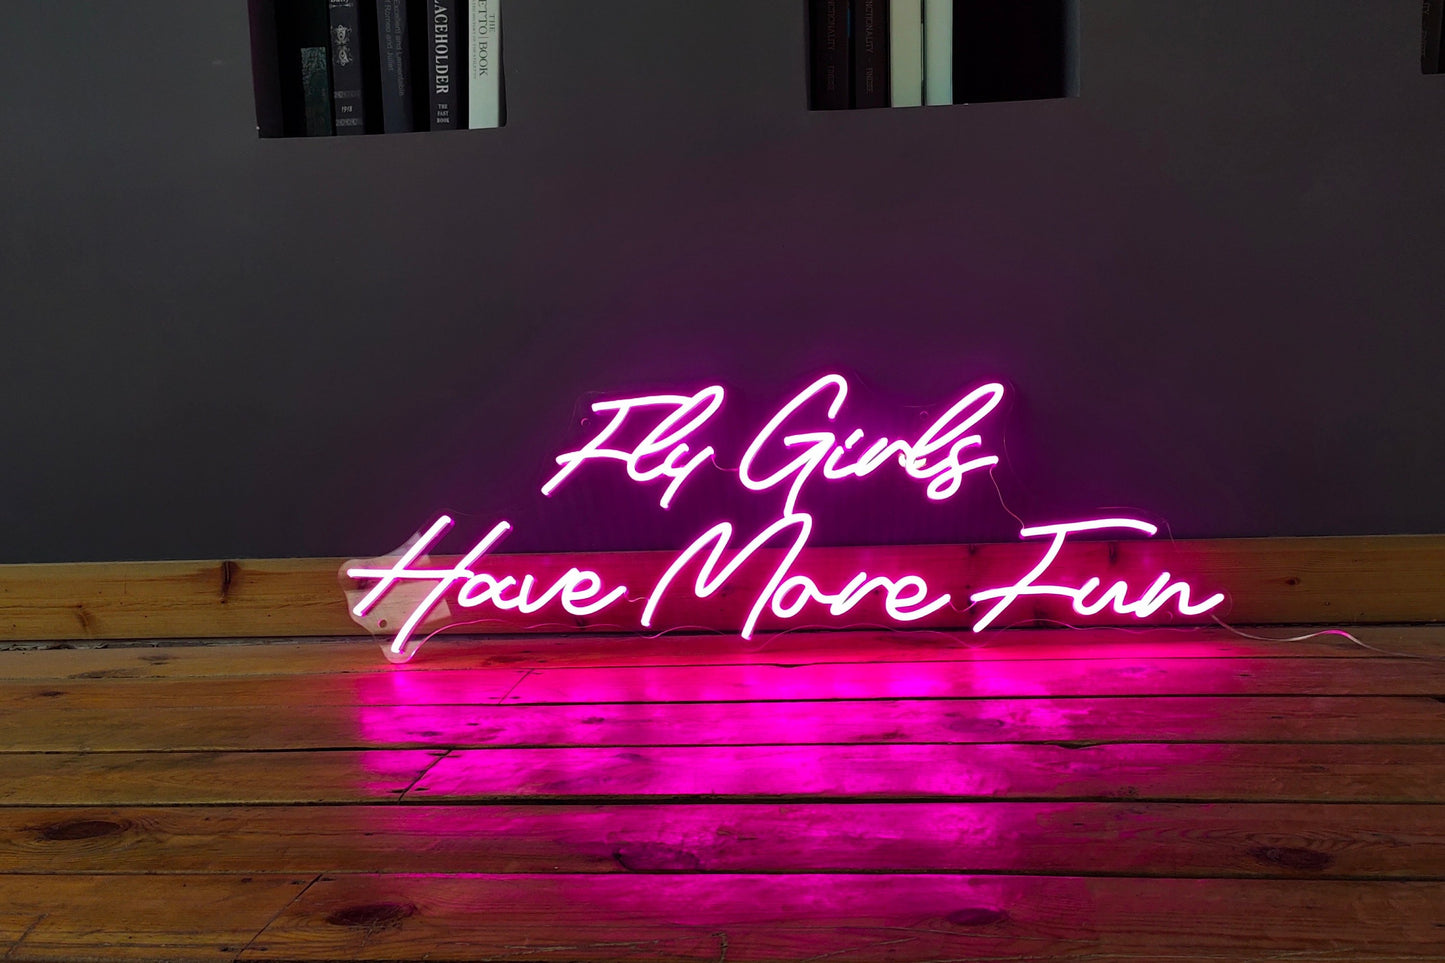 Fly girls have more fun neon sign